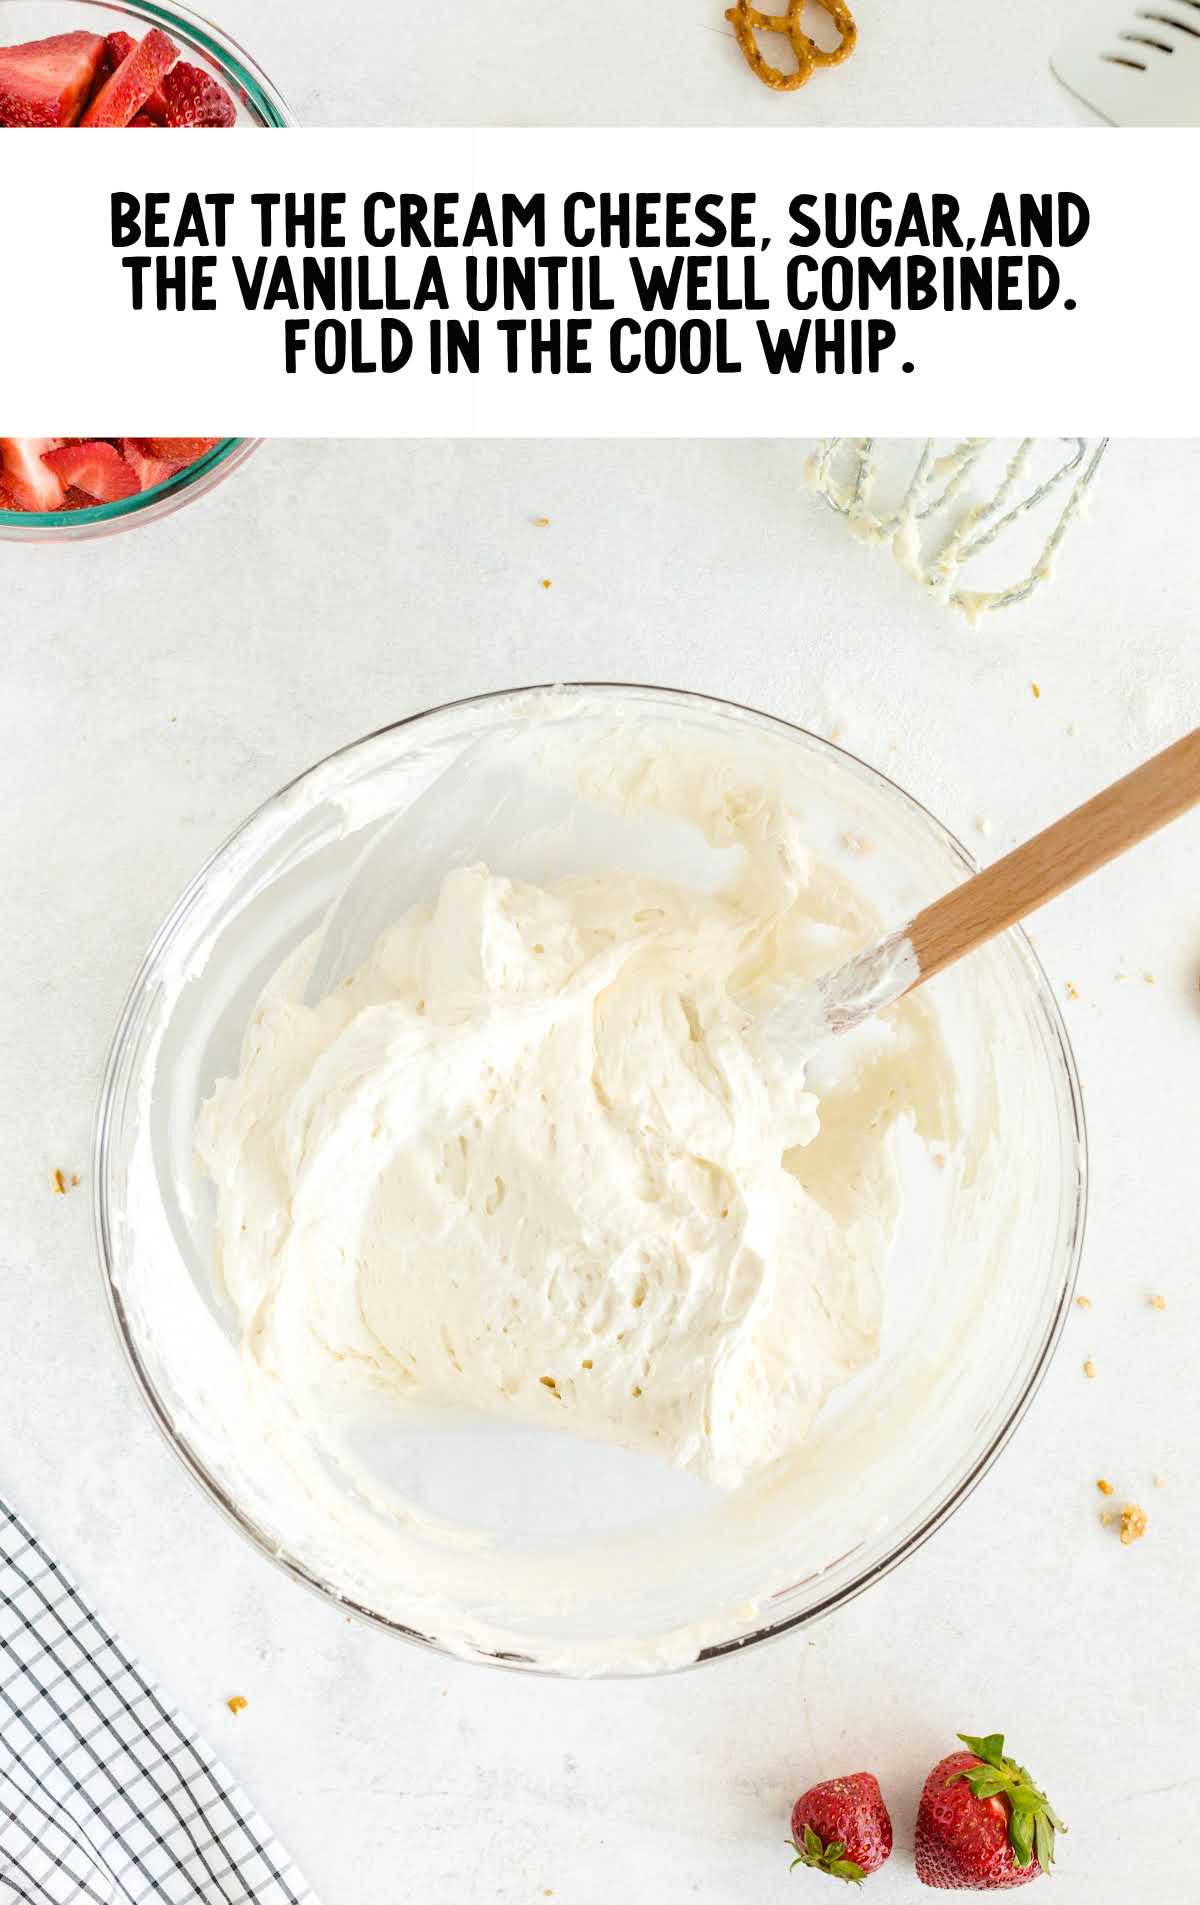 cream cheese, sugar, vanilla and cool whip folded in a bowl